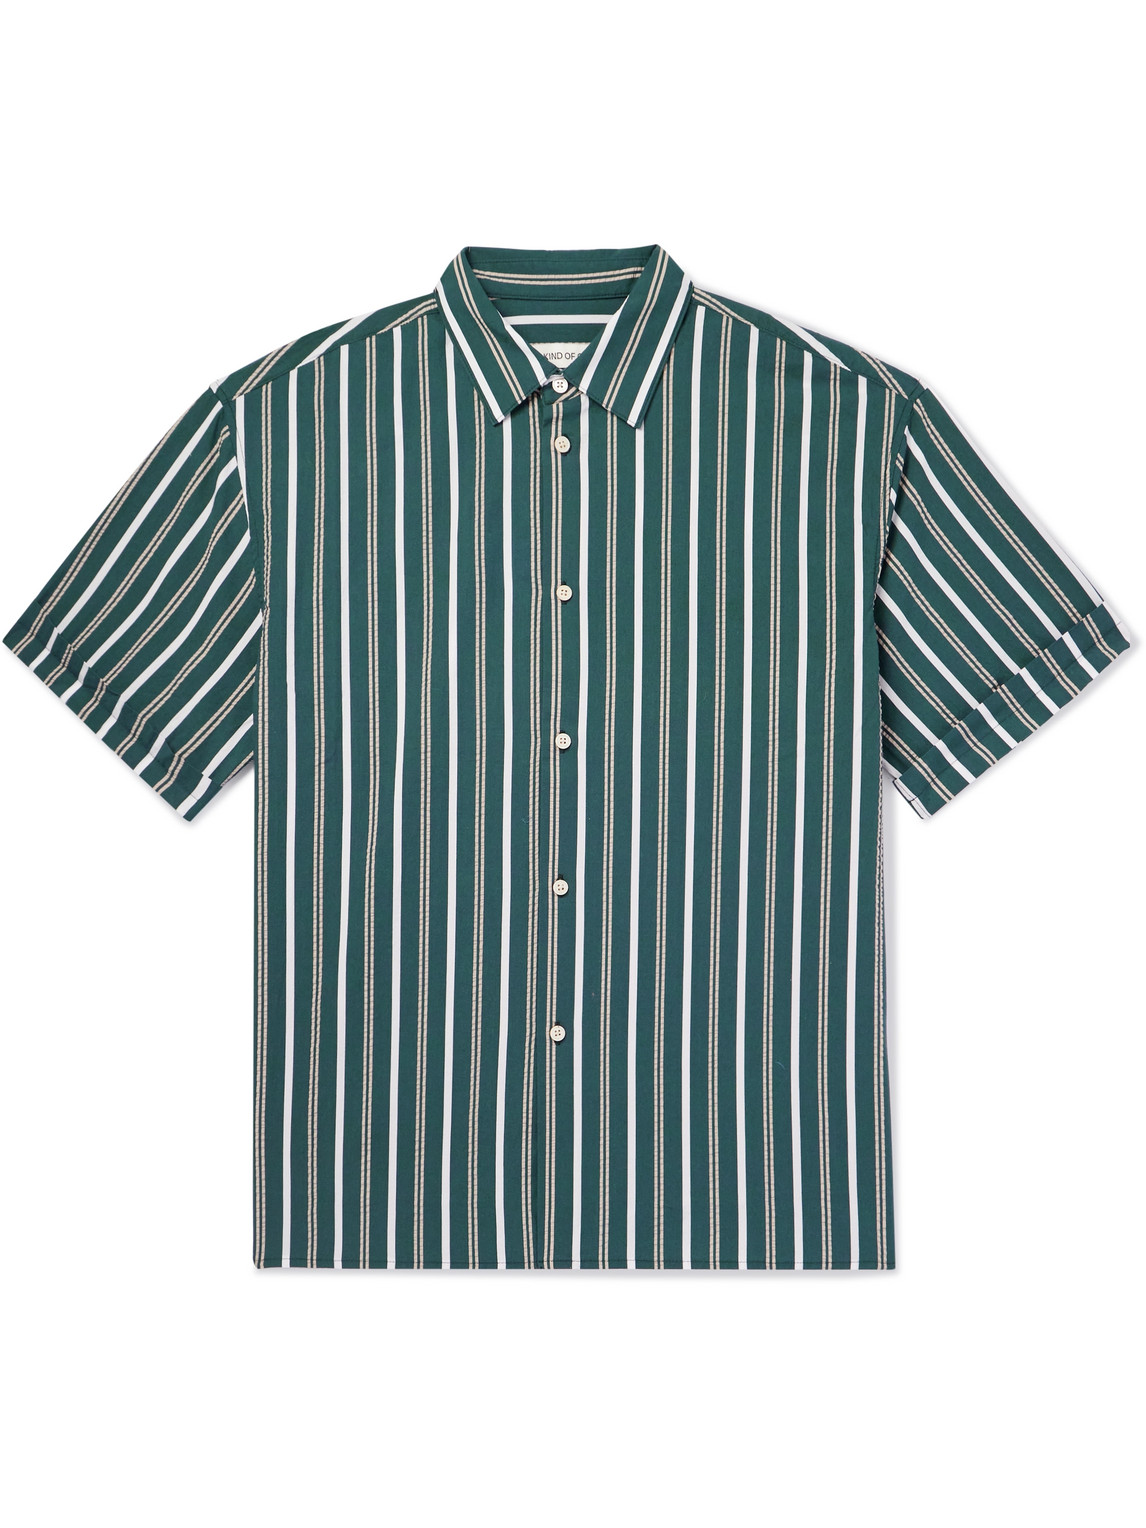 A Kind Of Guise - Elio Striped Textured-Cotton Shirt - Men - Green - S von A Kind Of Guise